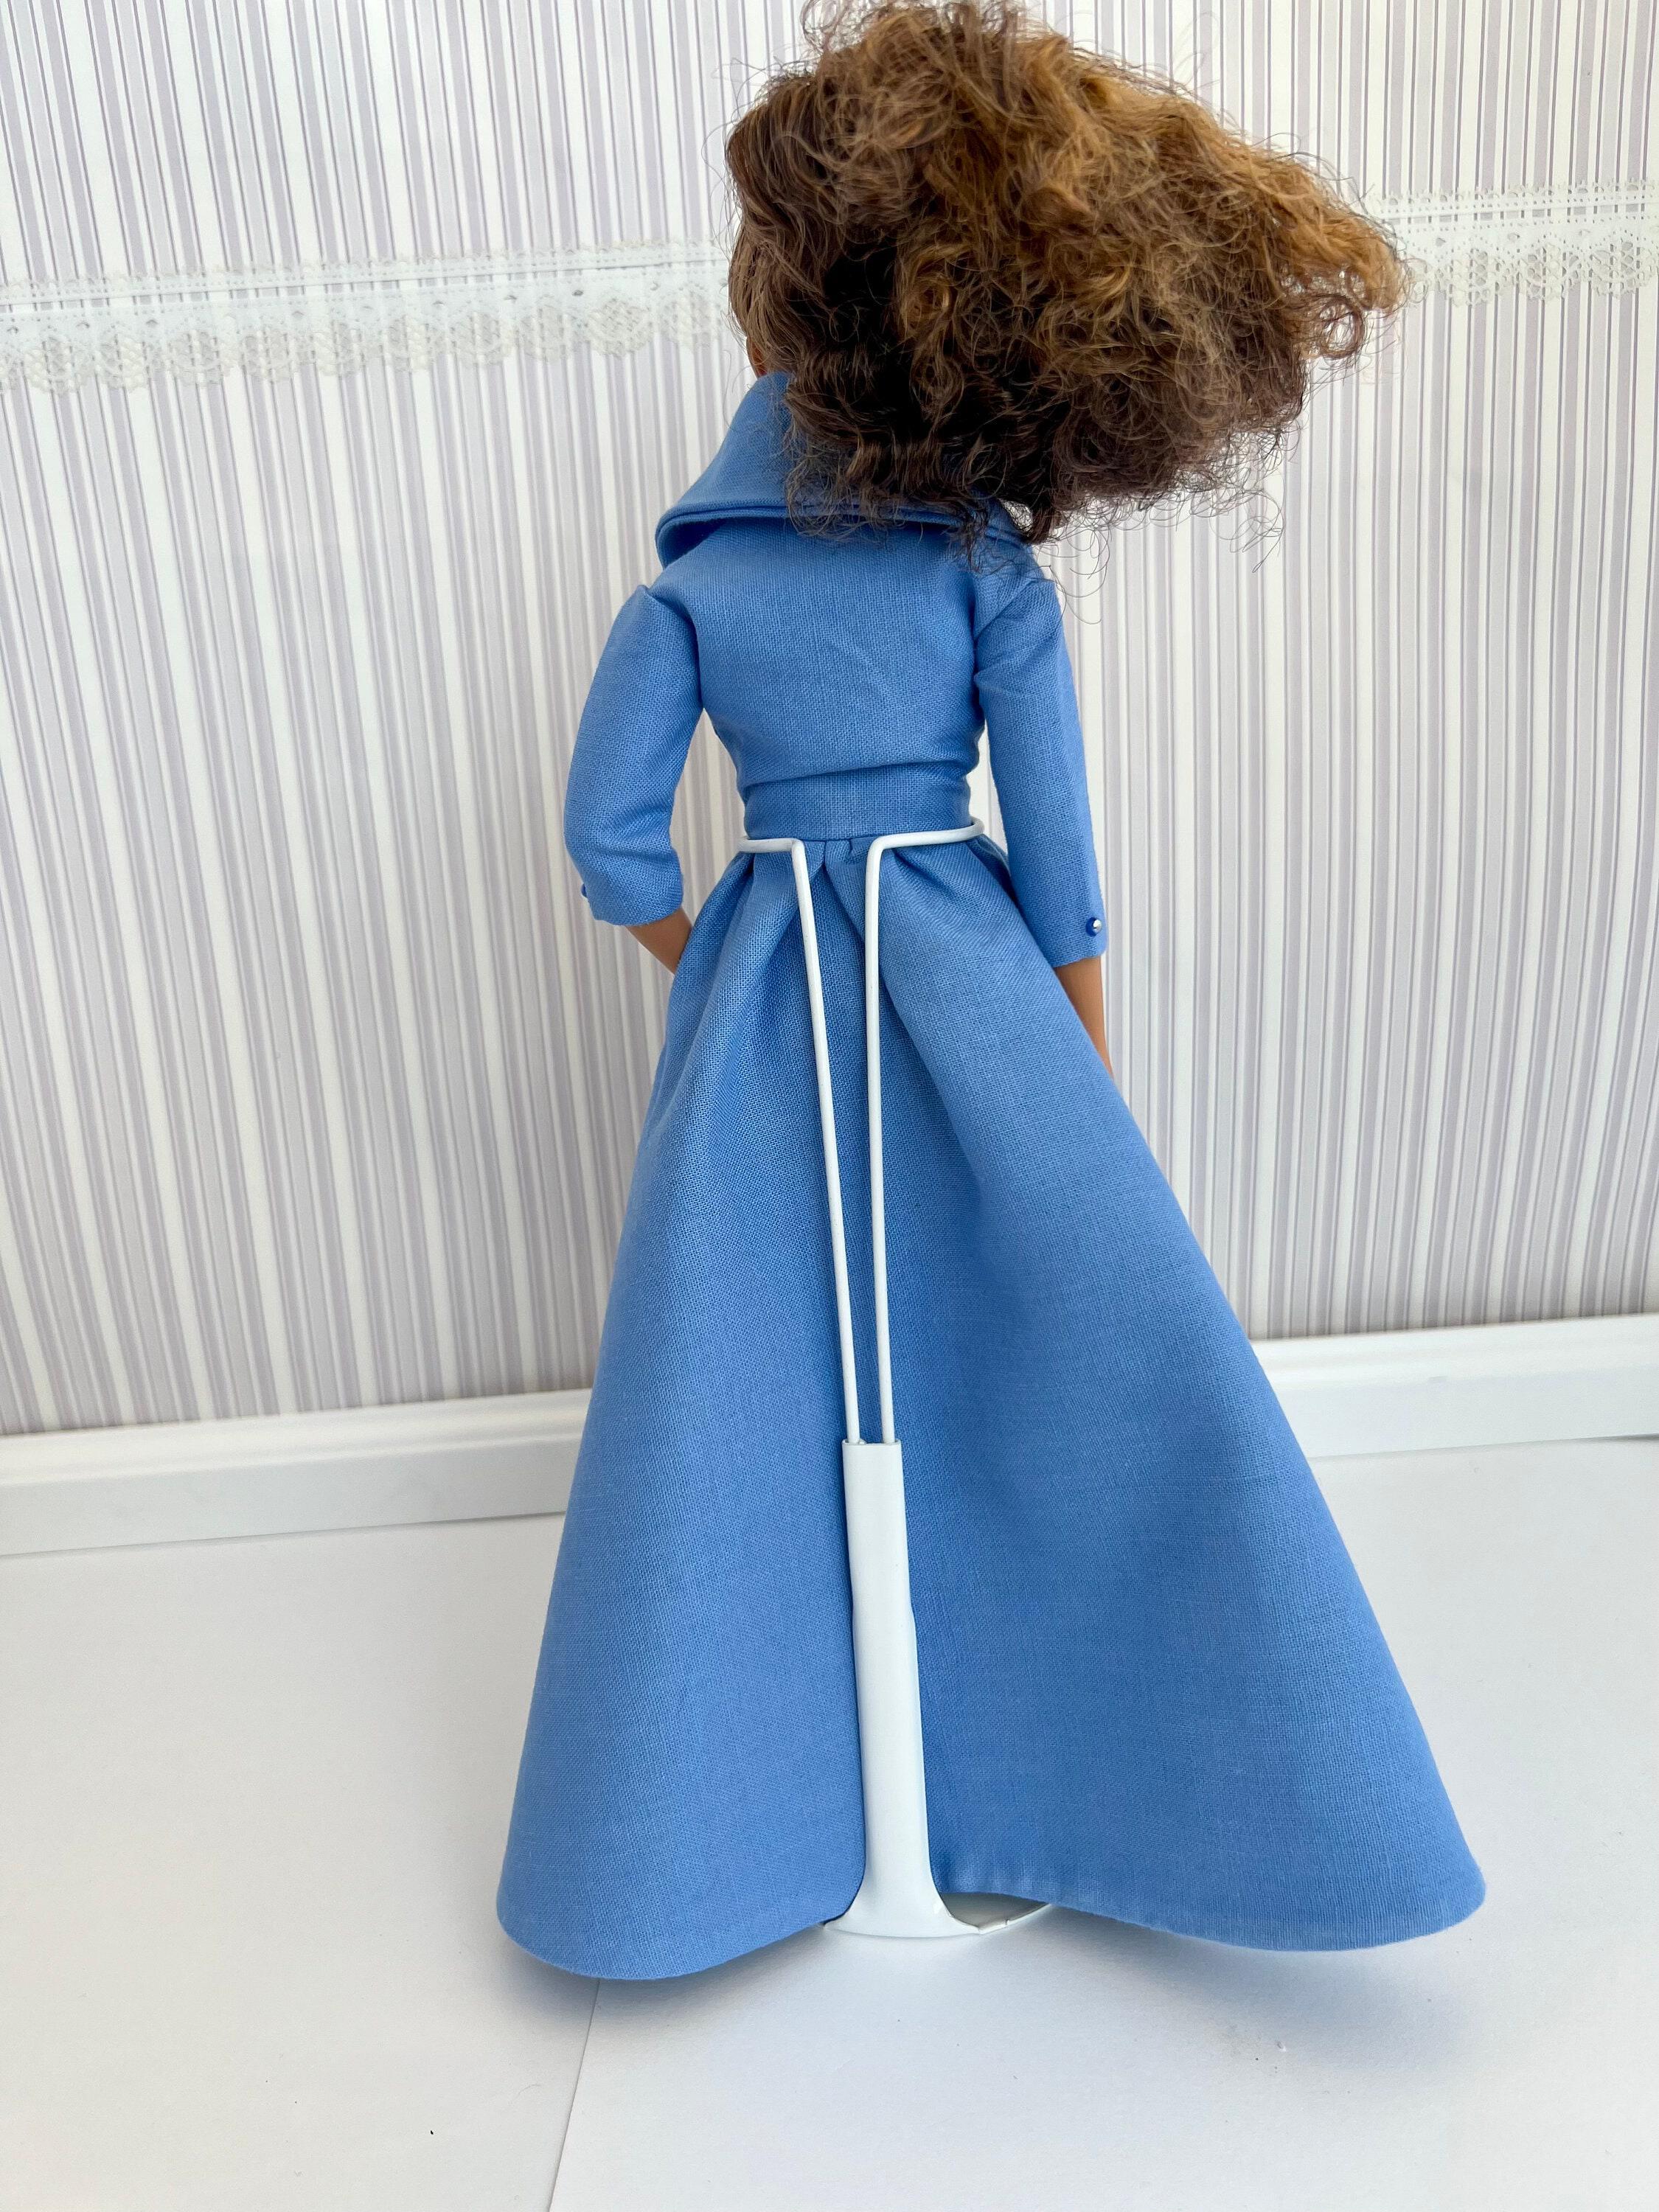 Fun & Games :: Stuffed Animals, Dolls & Plush :: 2-piece Pantsuit Set Made  for 11-12-inch Fashion Dolls (post 2000s) Handmade with Fully Lined Pants  and Jacket Blue on Blue Floral 1:6 Scale